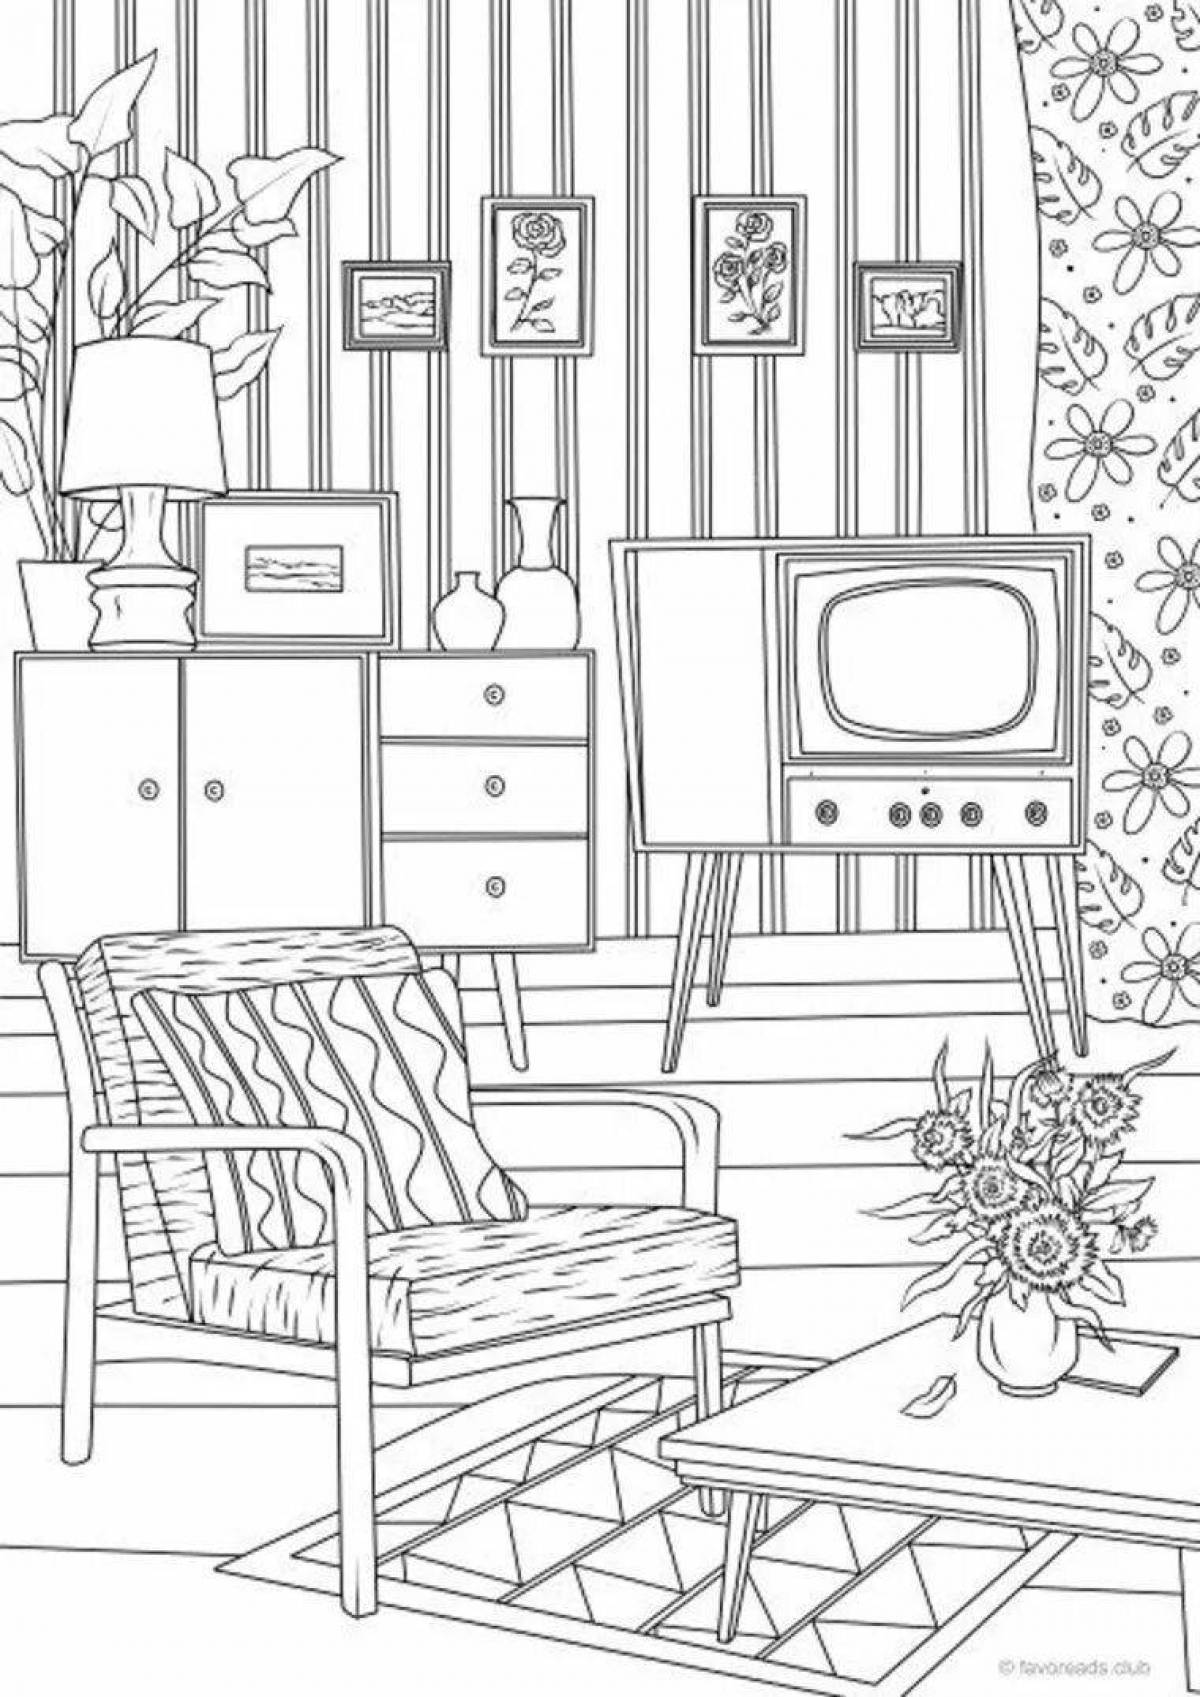 Coloring-imagination coloring page kids room